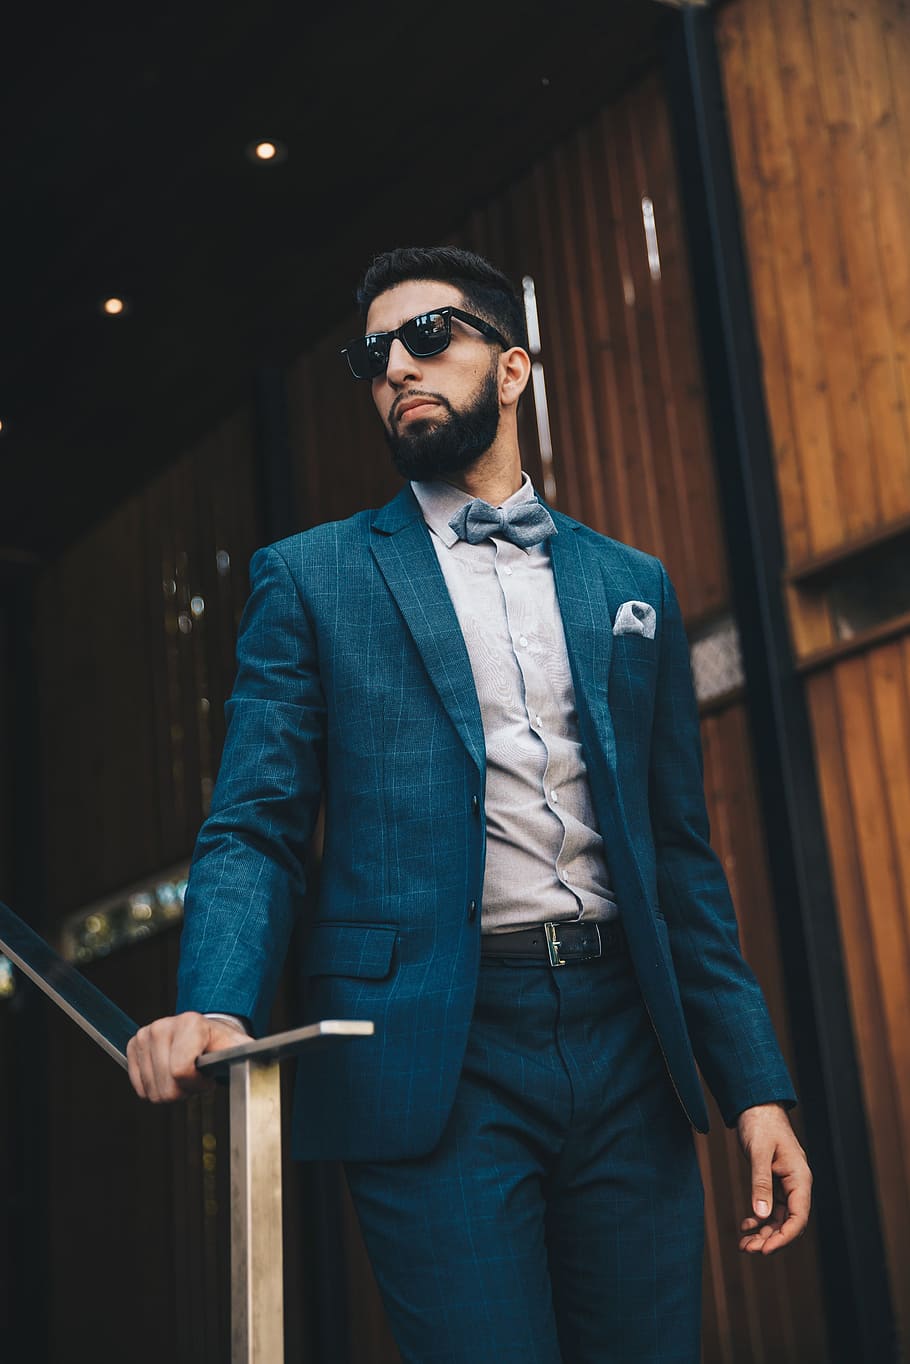 Tailored Suit Photo, Fashion, Men, Shopify, Glasses, Suits, Young adult